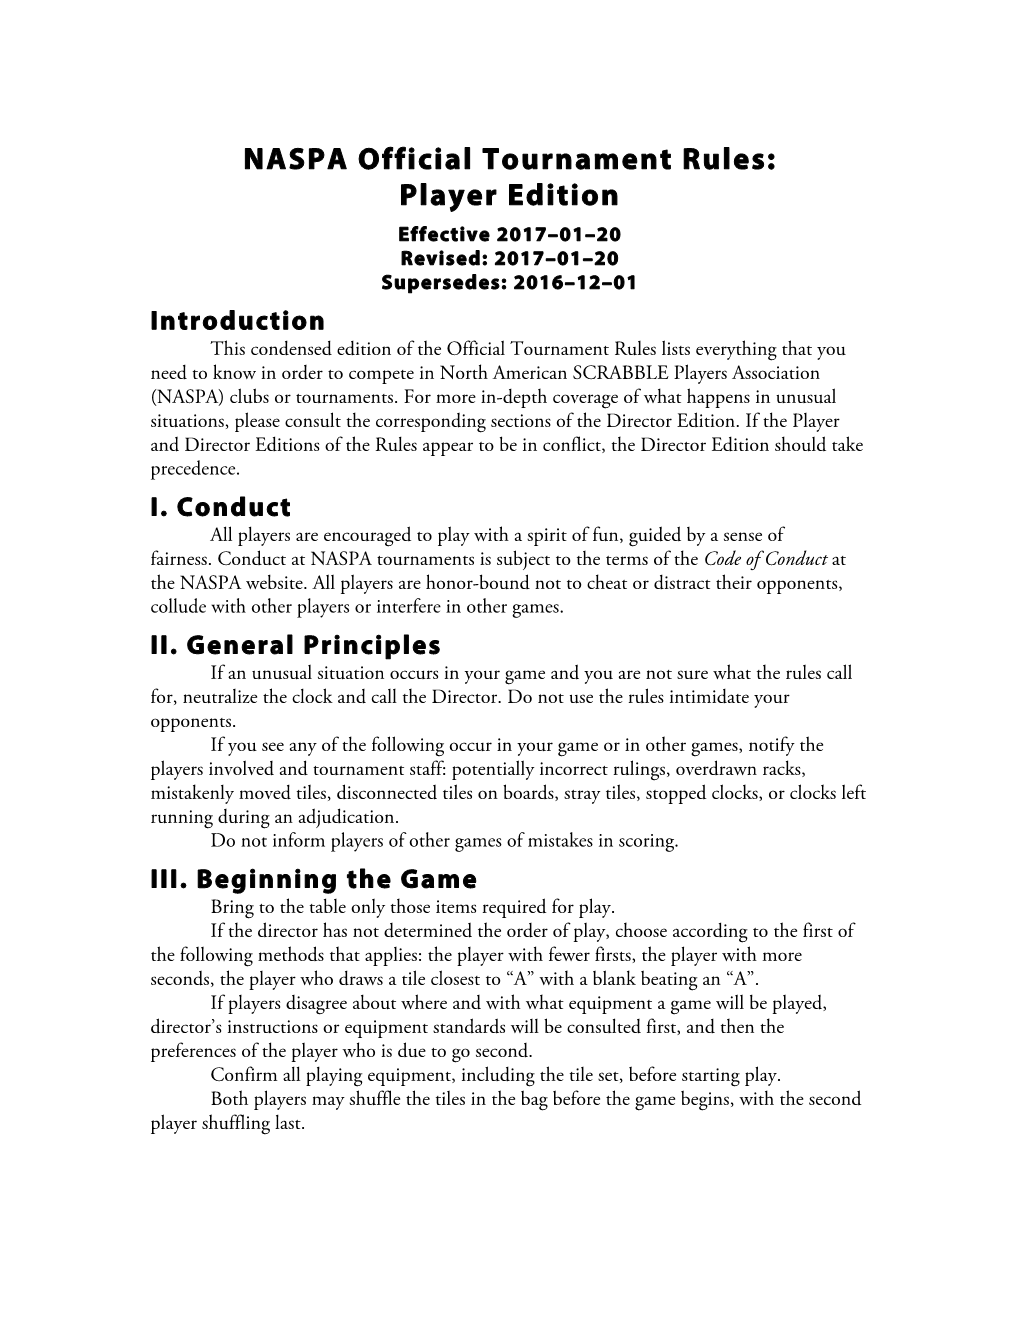 NASPA Official Tournament Rules: Player Edition